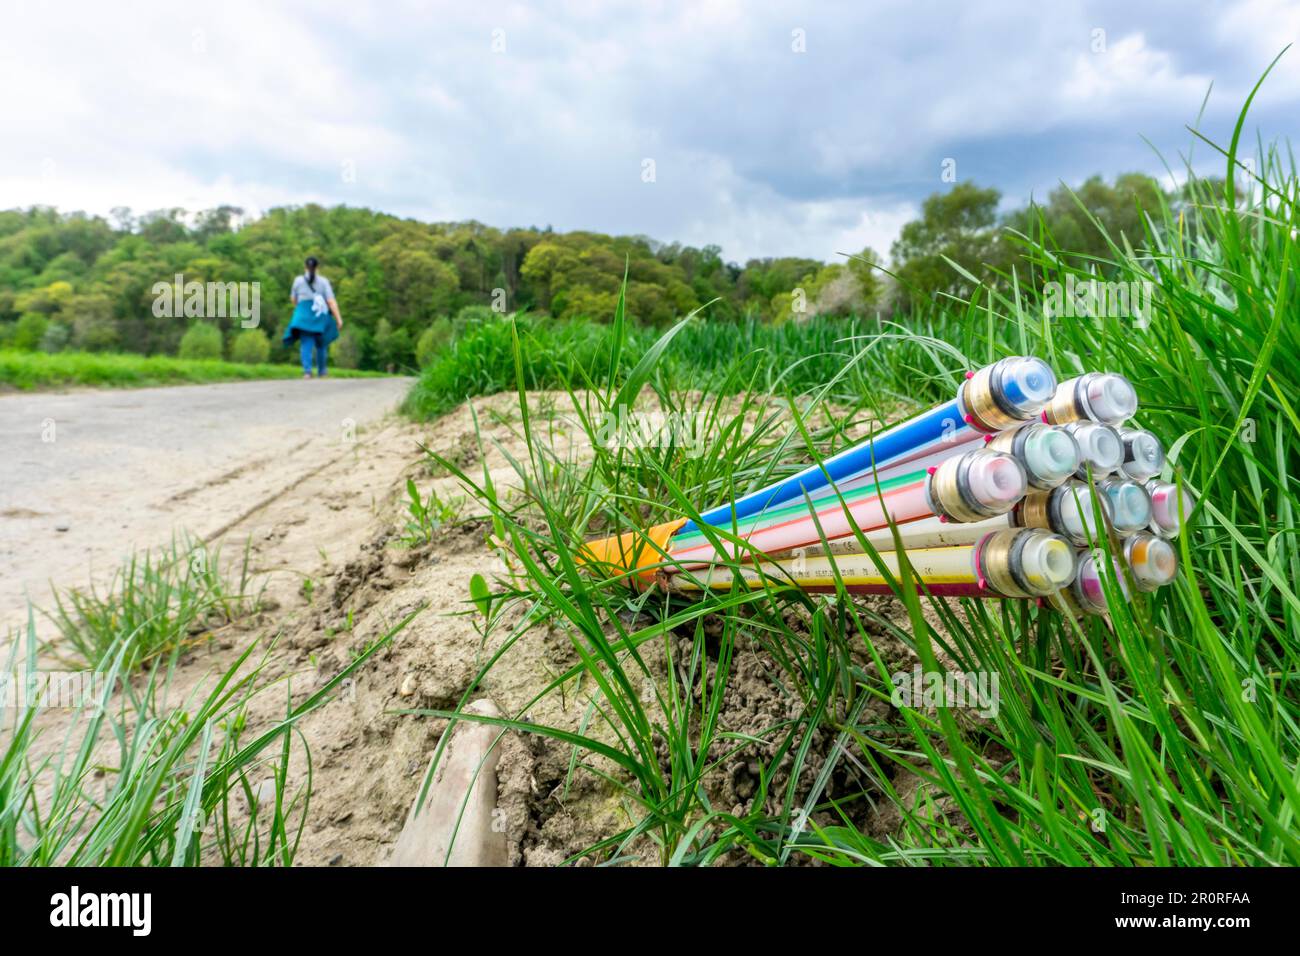 Fibre optic cable, freshly laid along a country lane, provision of fast internet in rural areas, Mülheim an der Ruhr, NRW, Germany Stock Photo